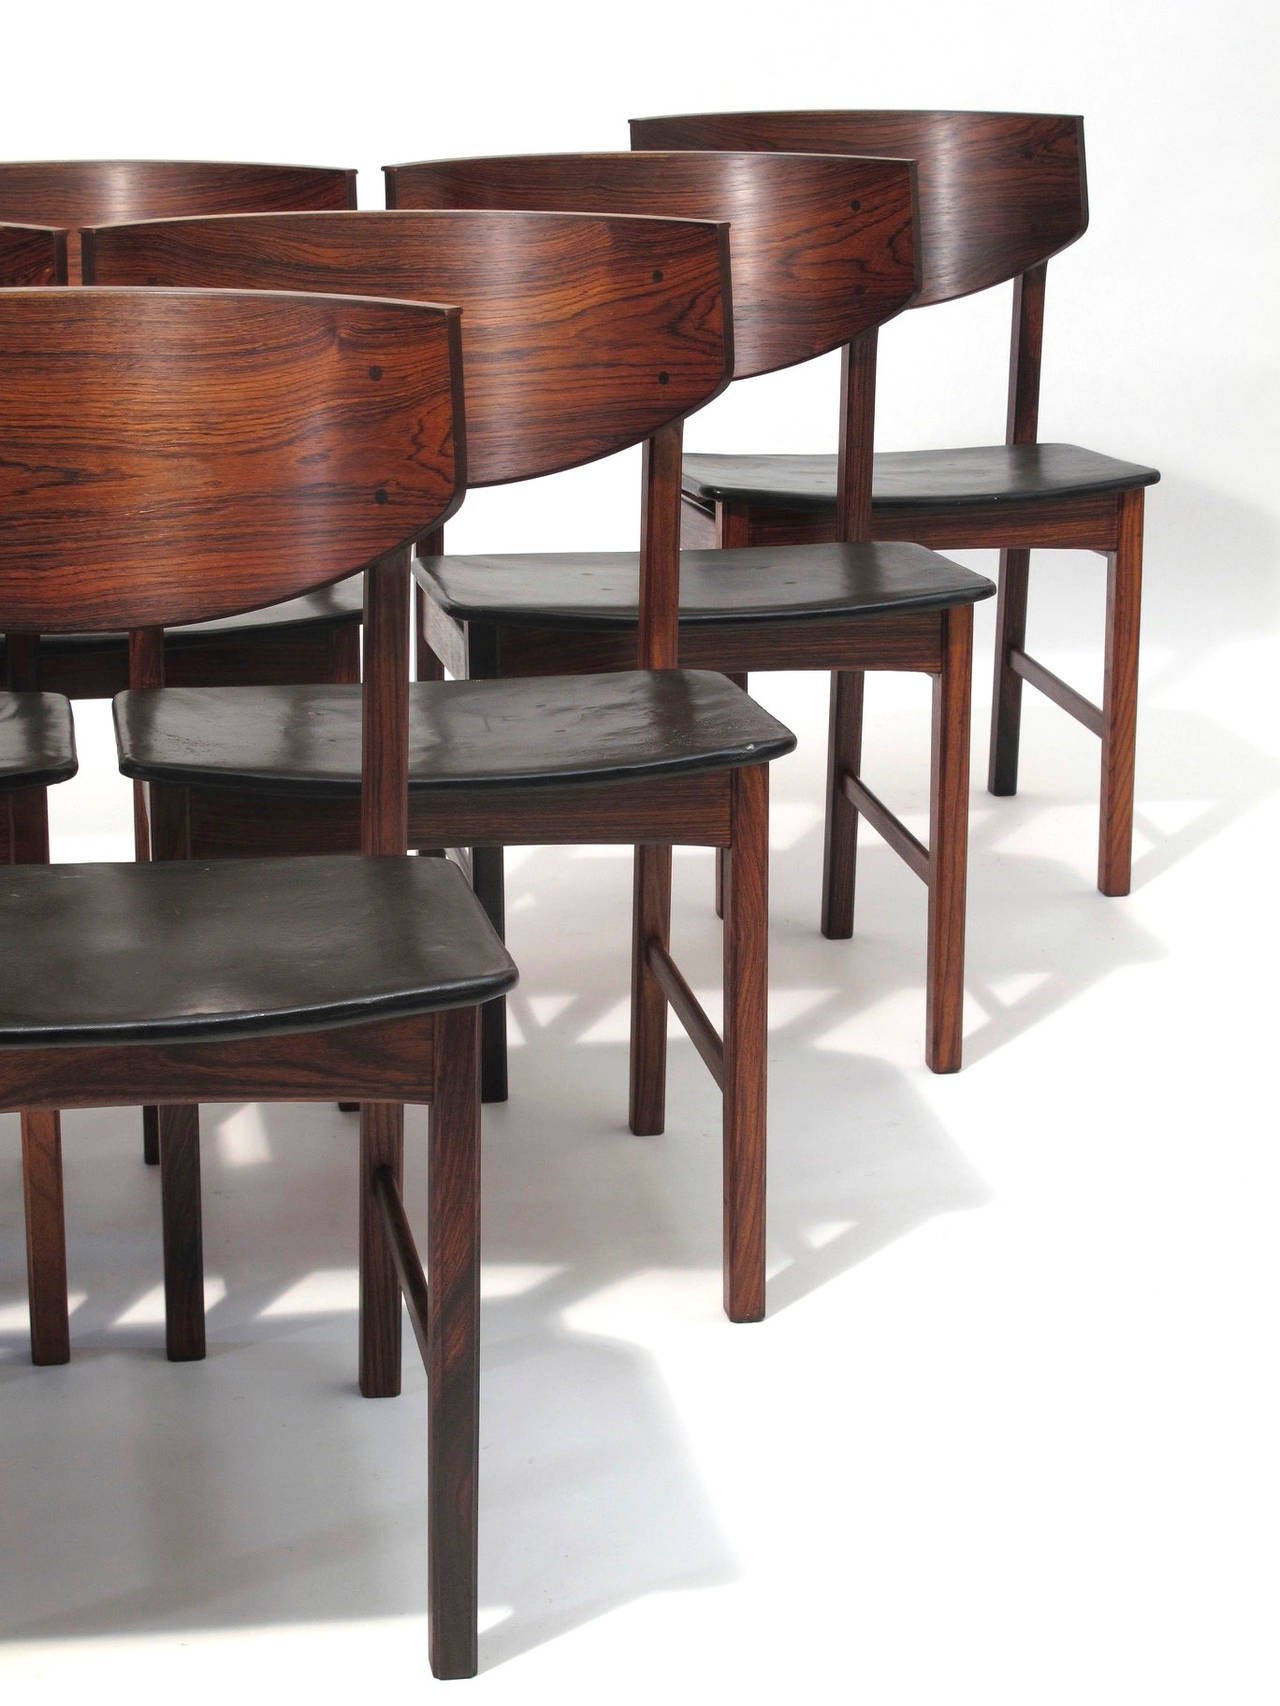 Eight Brazilian rosewood dining chairs with dramatic curved backs, rich dynamic grain and exposed joinery, upholstered in patinated black leather.